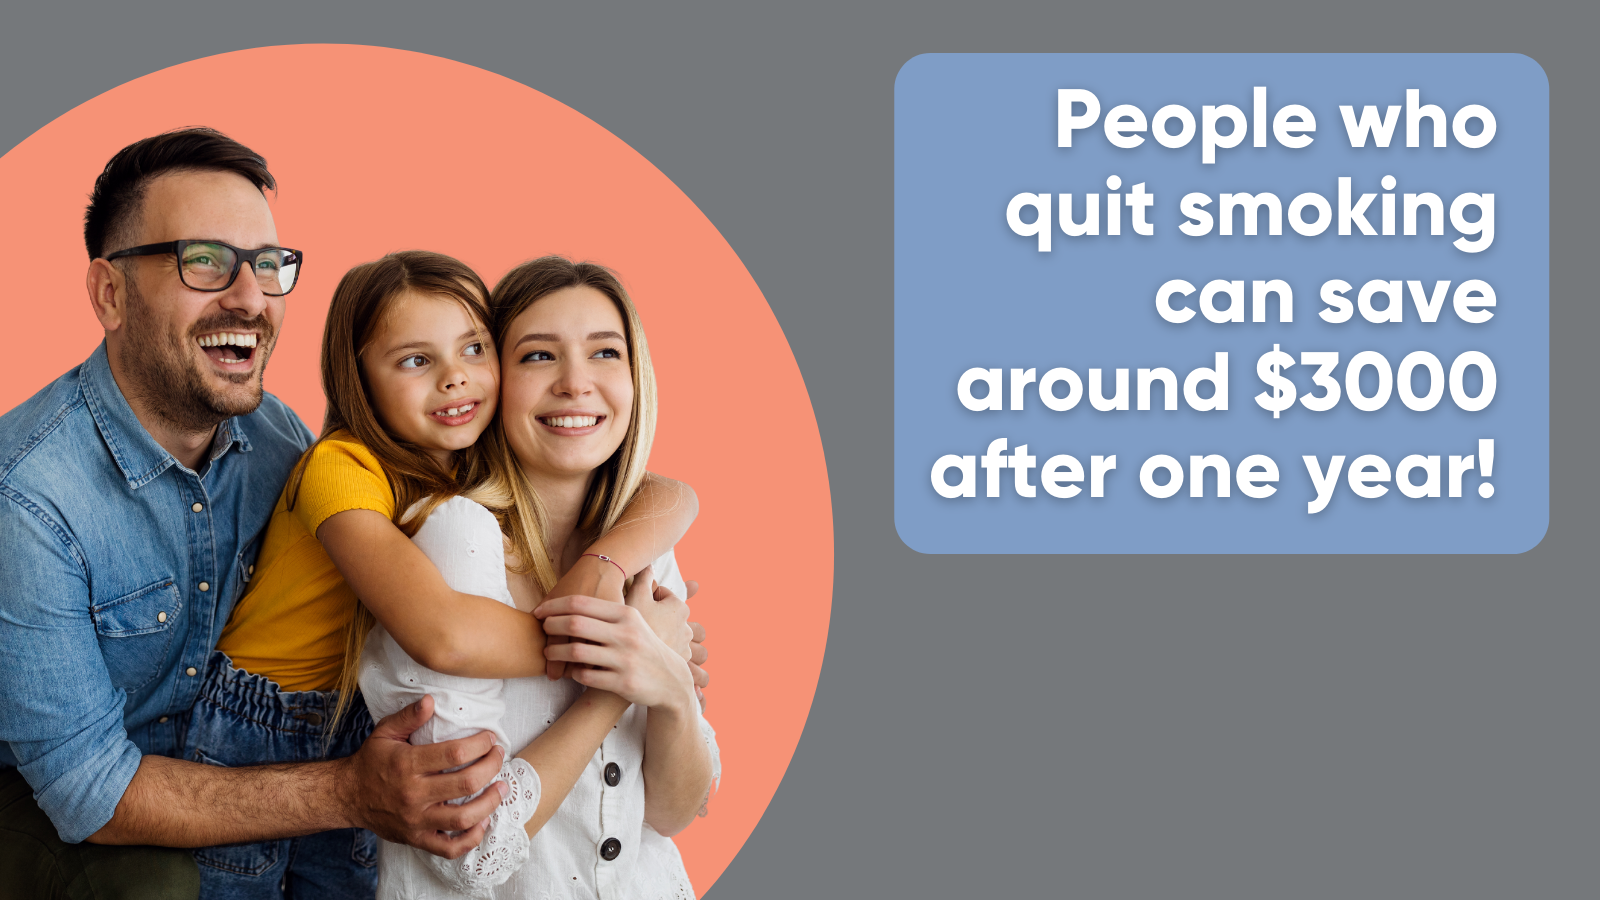 Image of Caucasian family: People who quit smoking can save around $3000 after one year!